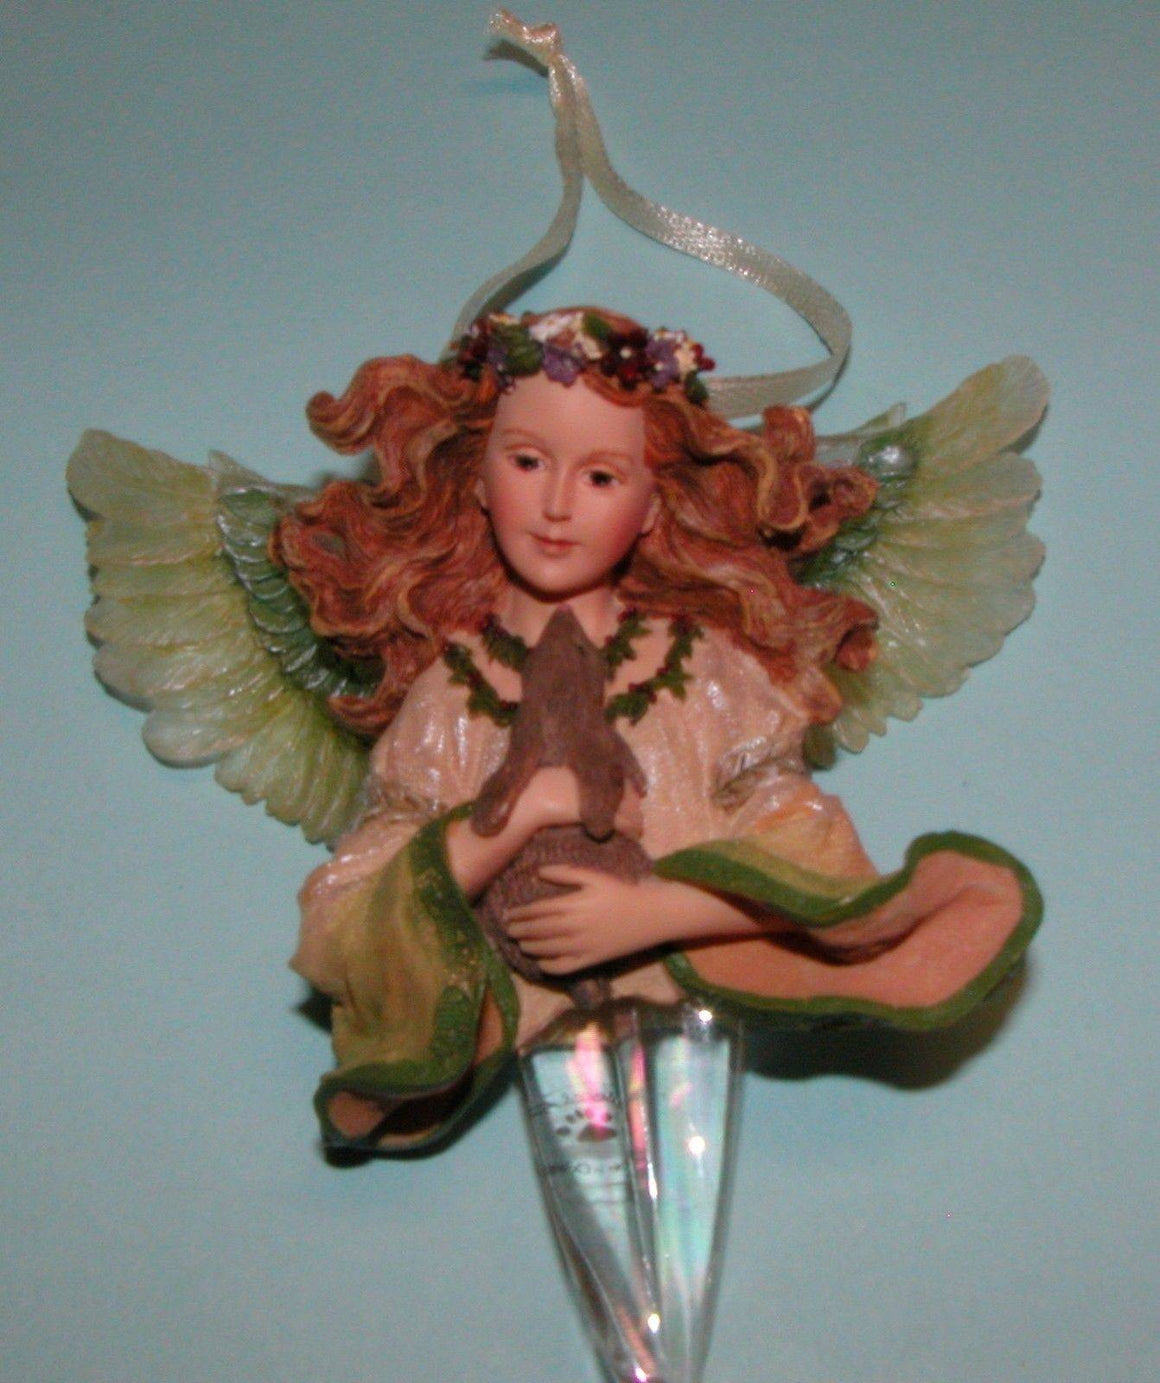 Floramella...Guardian of Nature-Boyds Bears Charming Angels Resin Ornament #25102 *